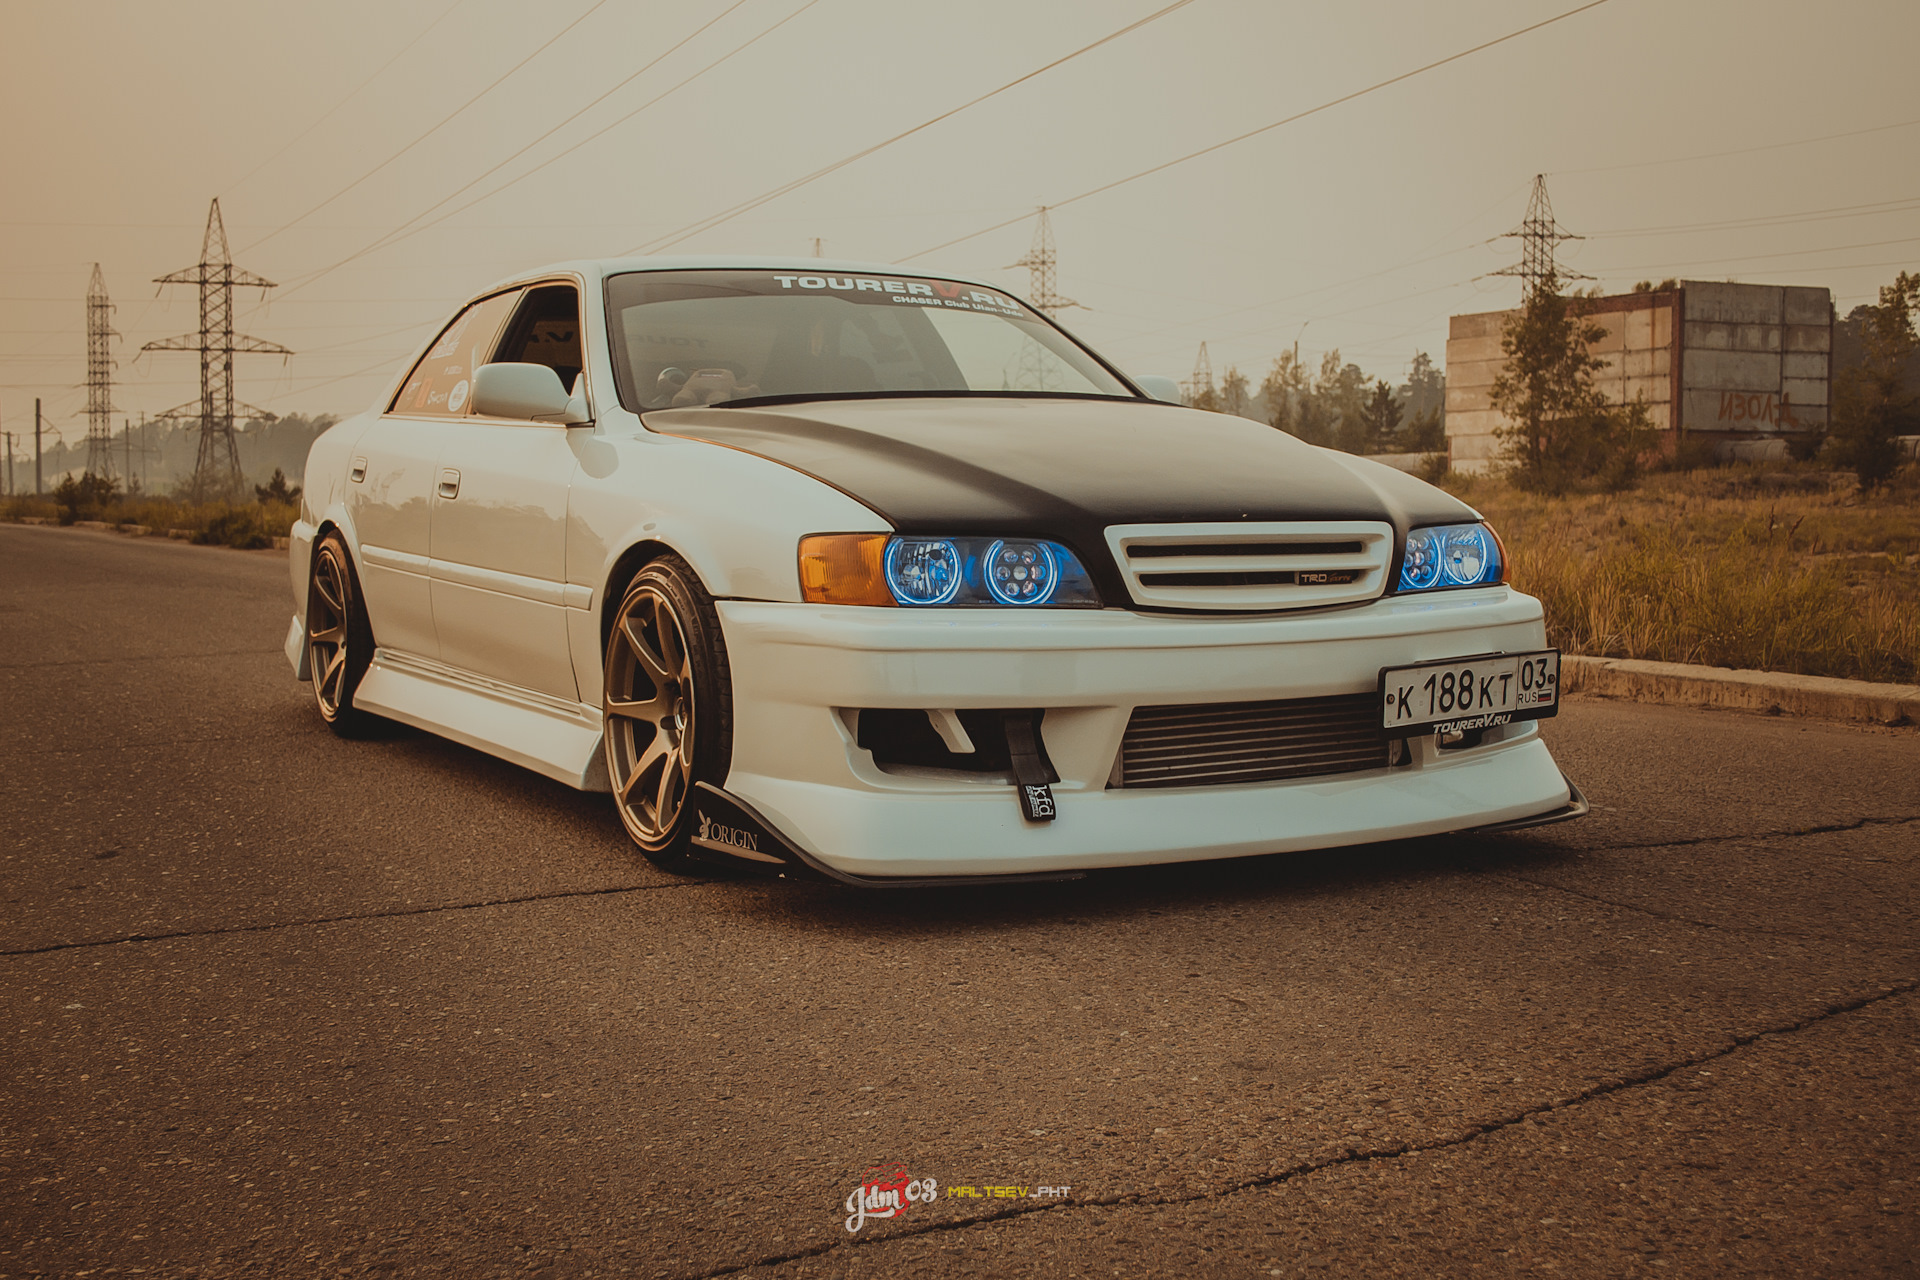 Toyota Chaser jzx100